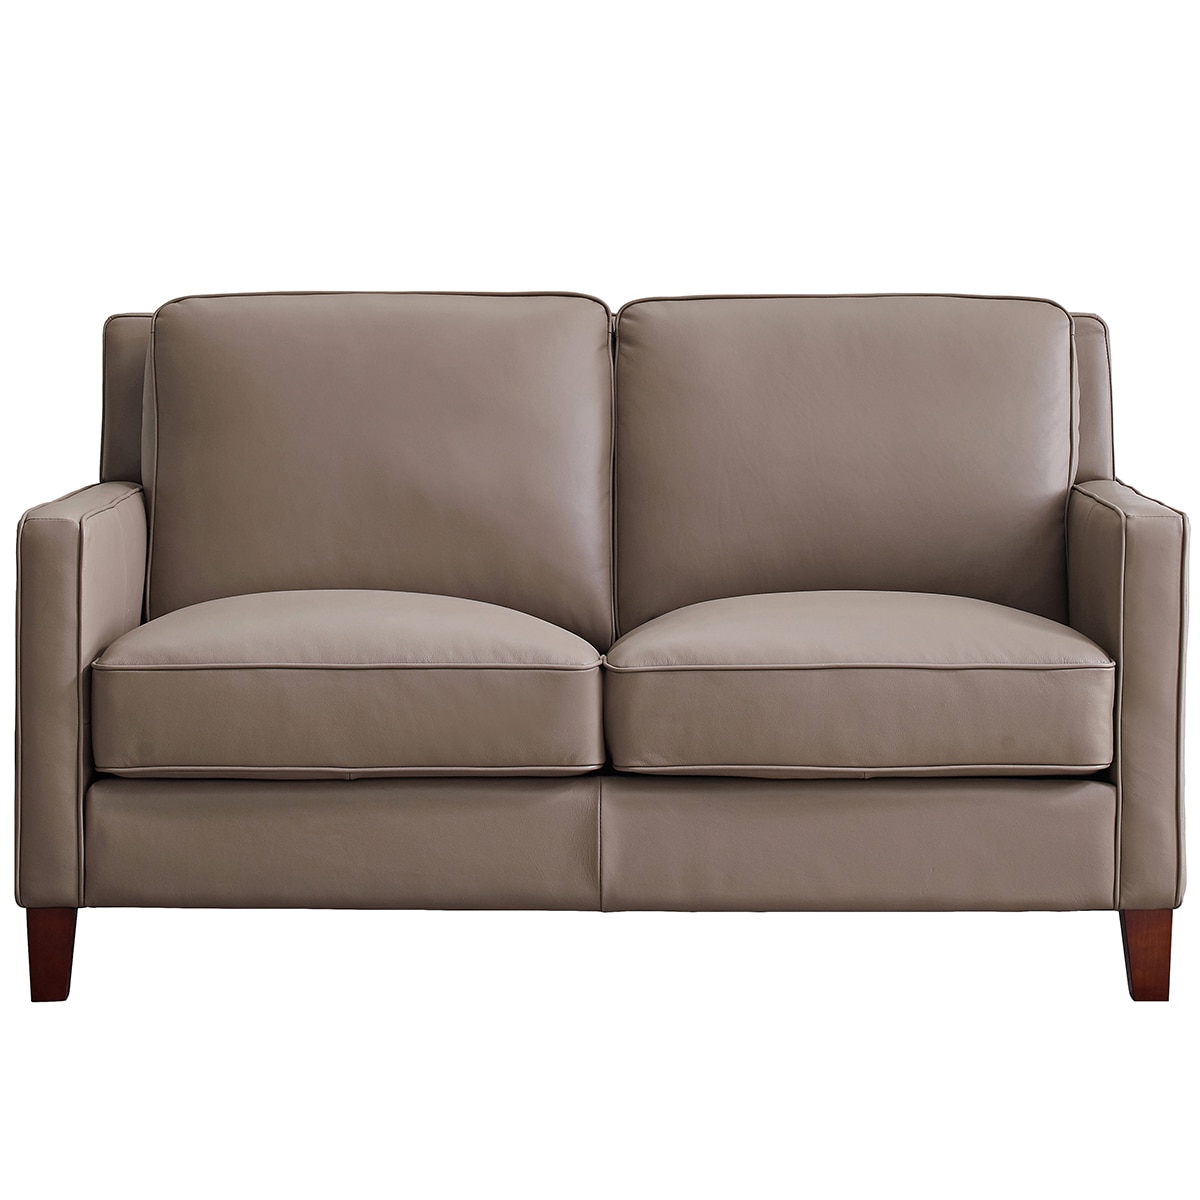 West Park Loveseat in Taupe